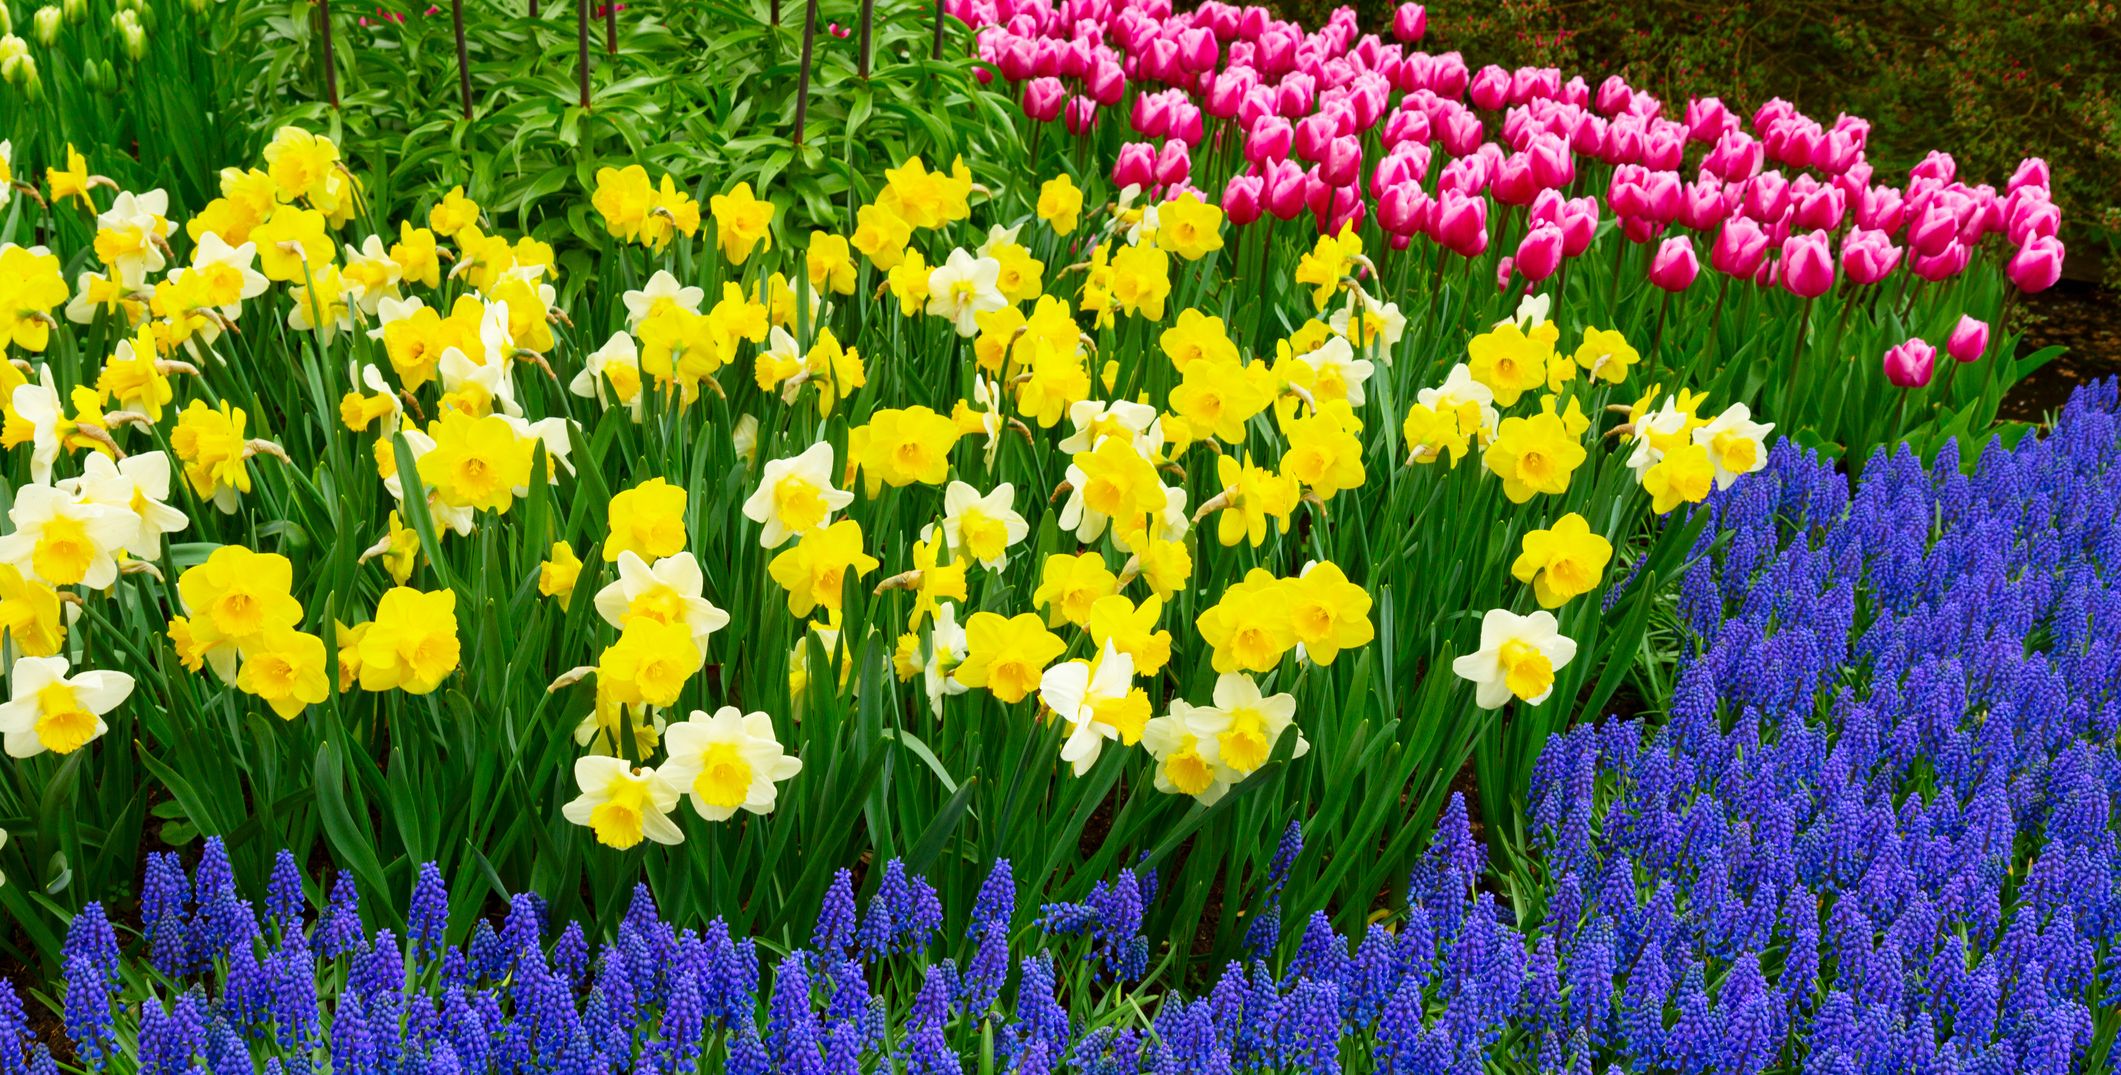 How to plant bulbs – expert tips for every type of bulb flower